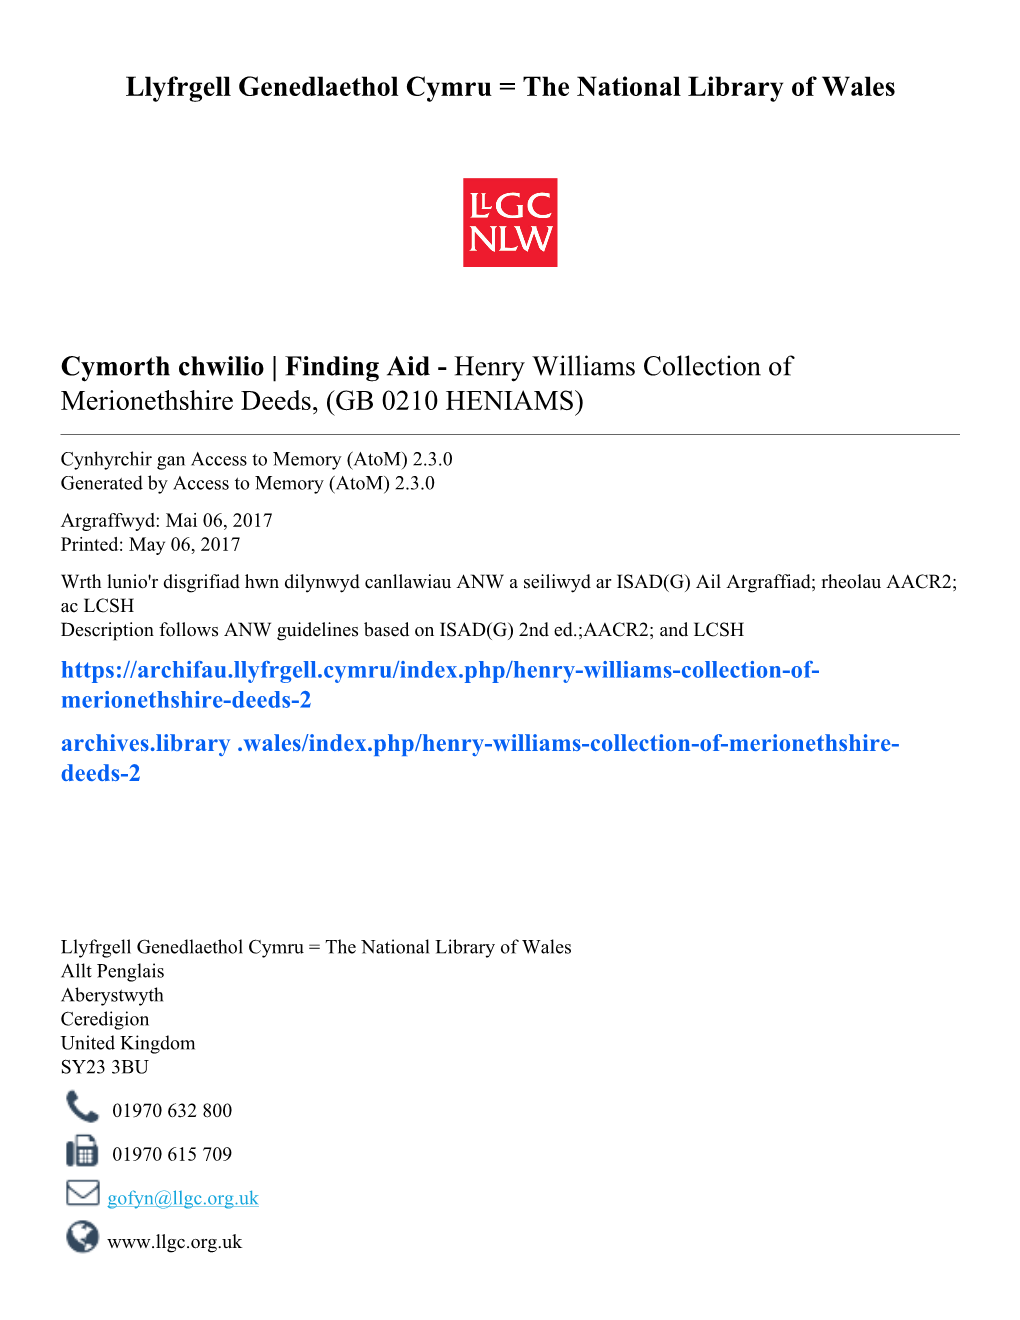 Henry Williams Collection of Merionethshire Deeds, (GB 0210 HENIAMS)